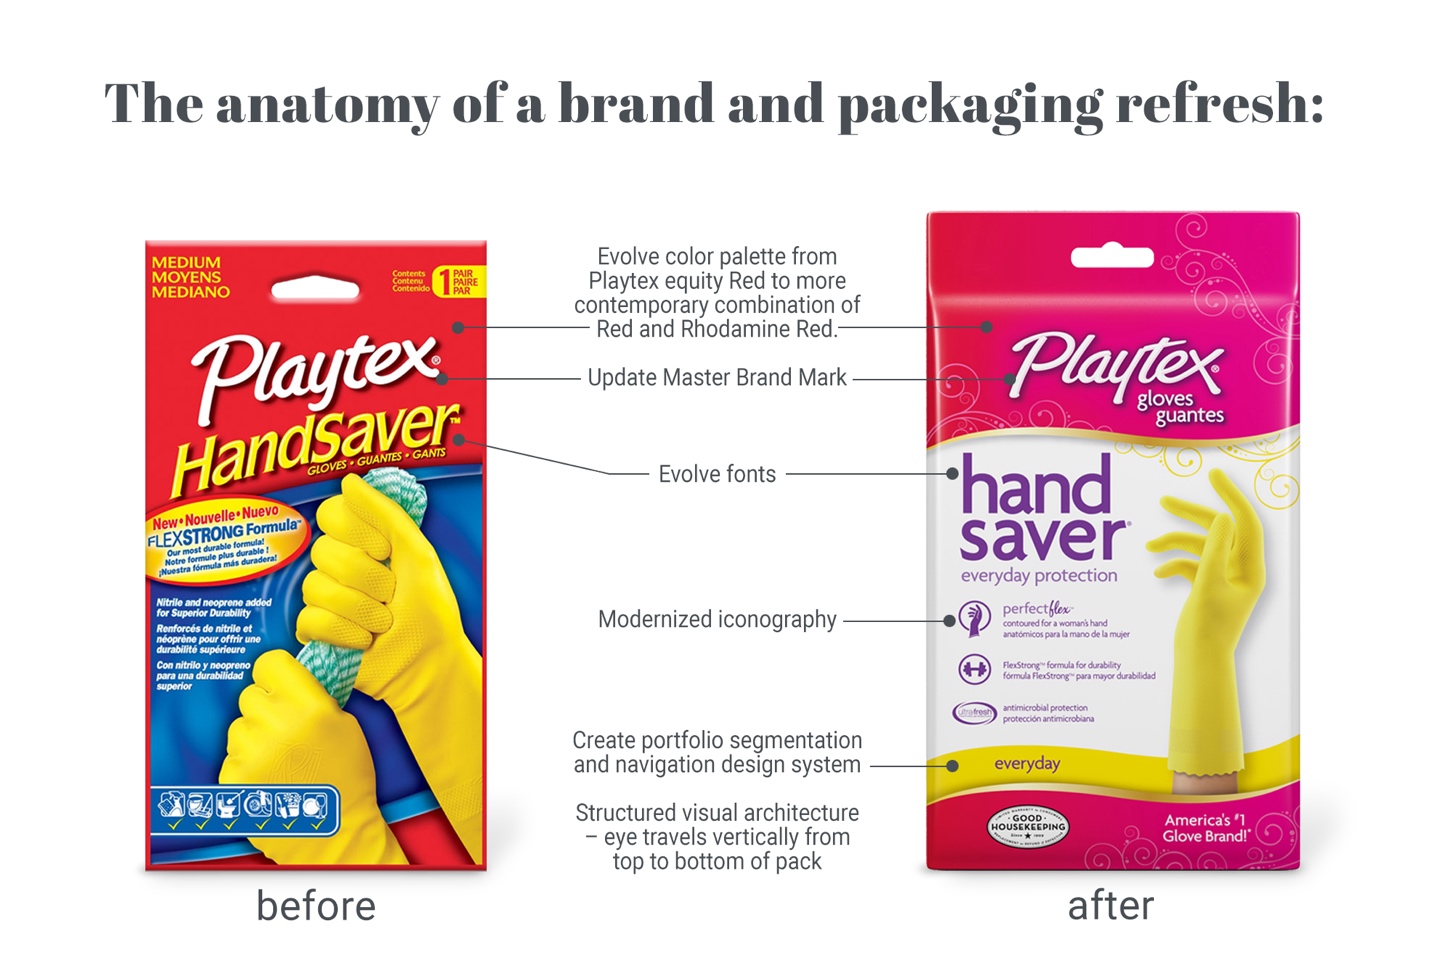 Two versions of product packaging for Playtex Gloves are shown to display how domo domo marketing put the brand back on the road to relevancy, helping Playtex to evolve from utilitarian to fashionable with a packaging refresh.